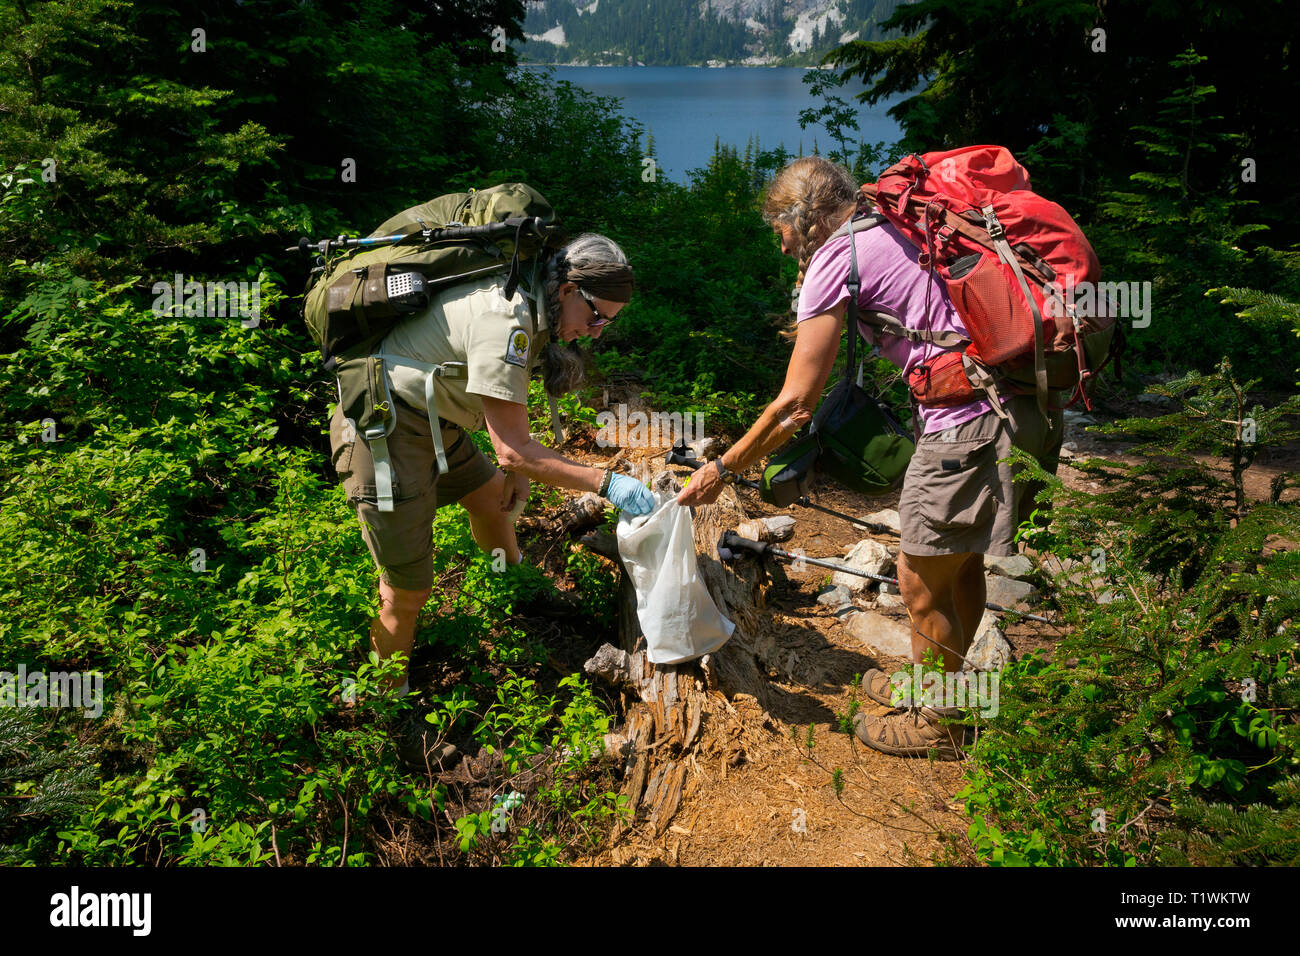 WASHINGTON - Forest Service Volunteer Jane Ellen Seymour, with a semi-enthusiastic helper, pick up garbage and human waste left by hikers. Stock Photo